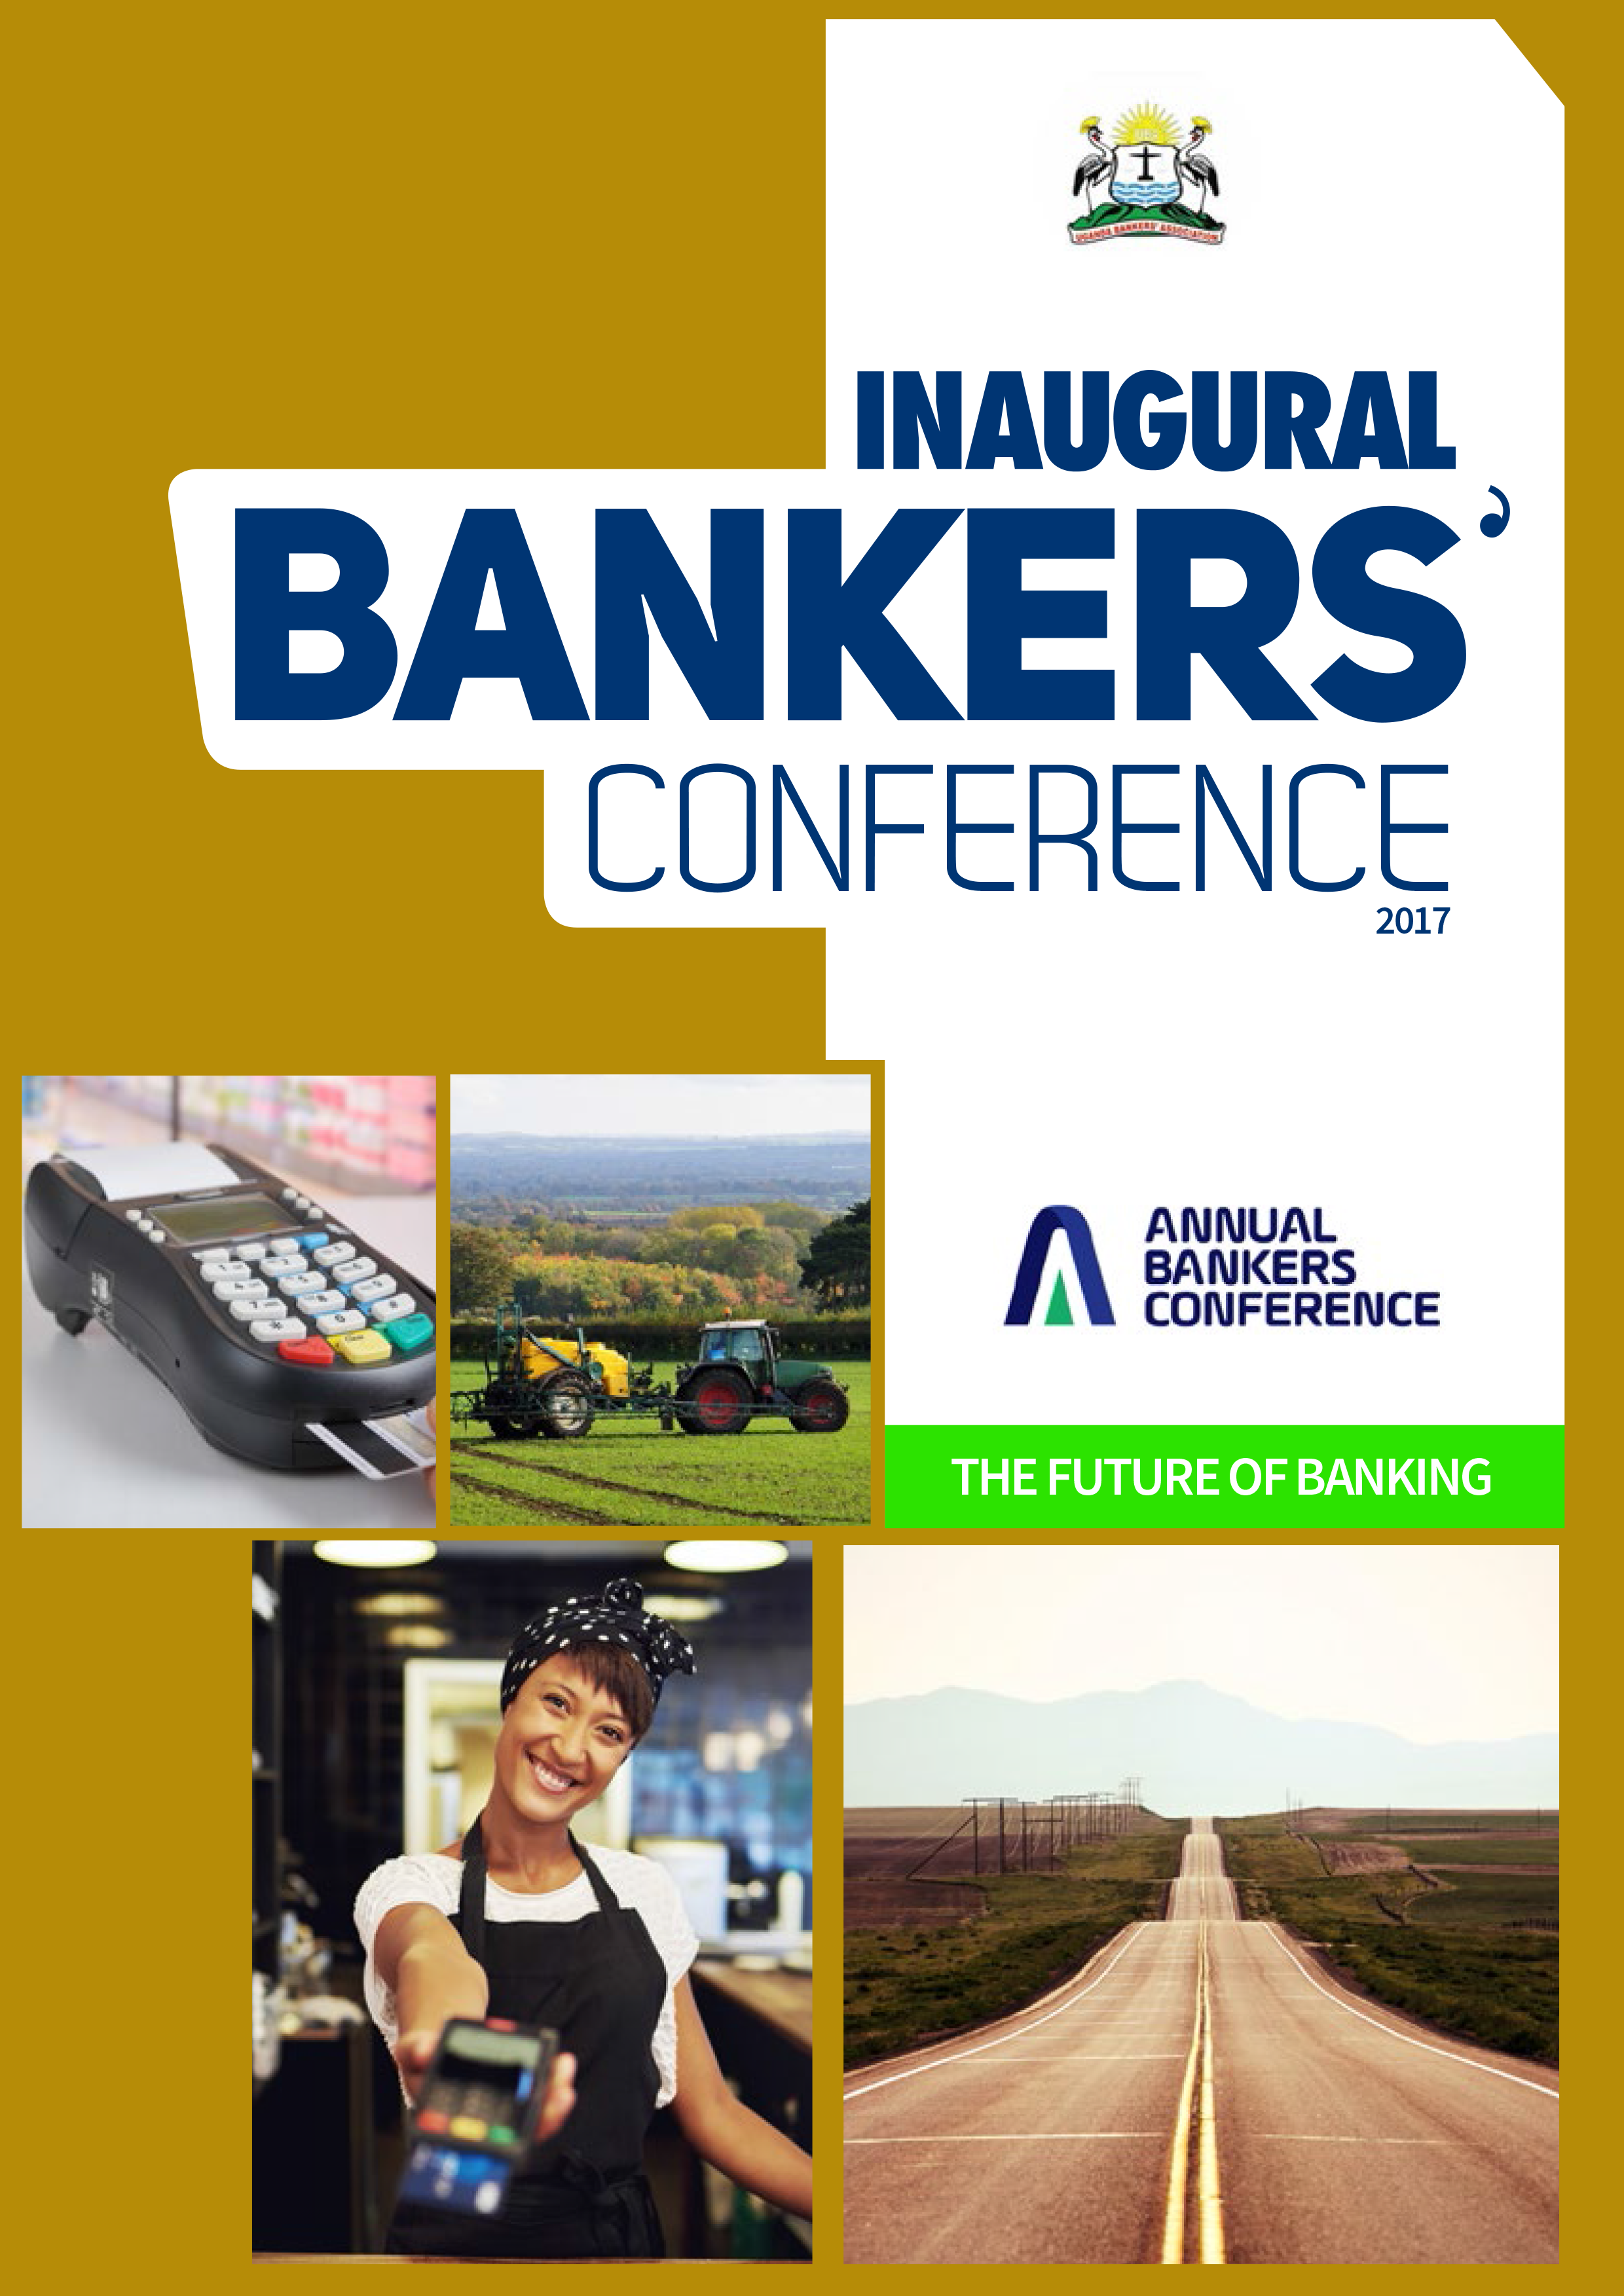 Annual Bankers conference 2017